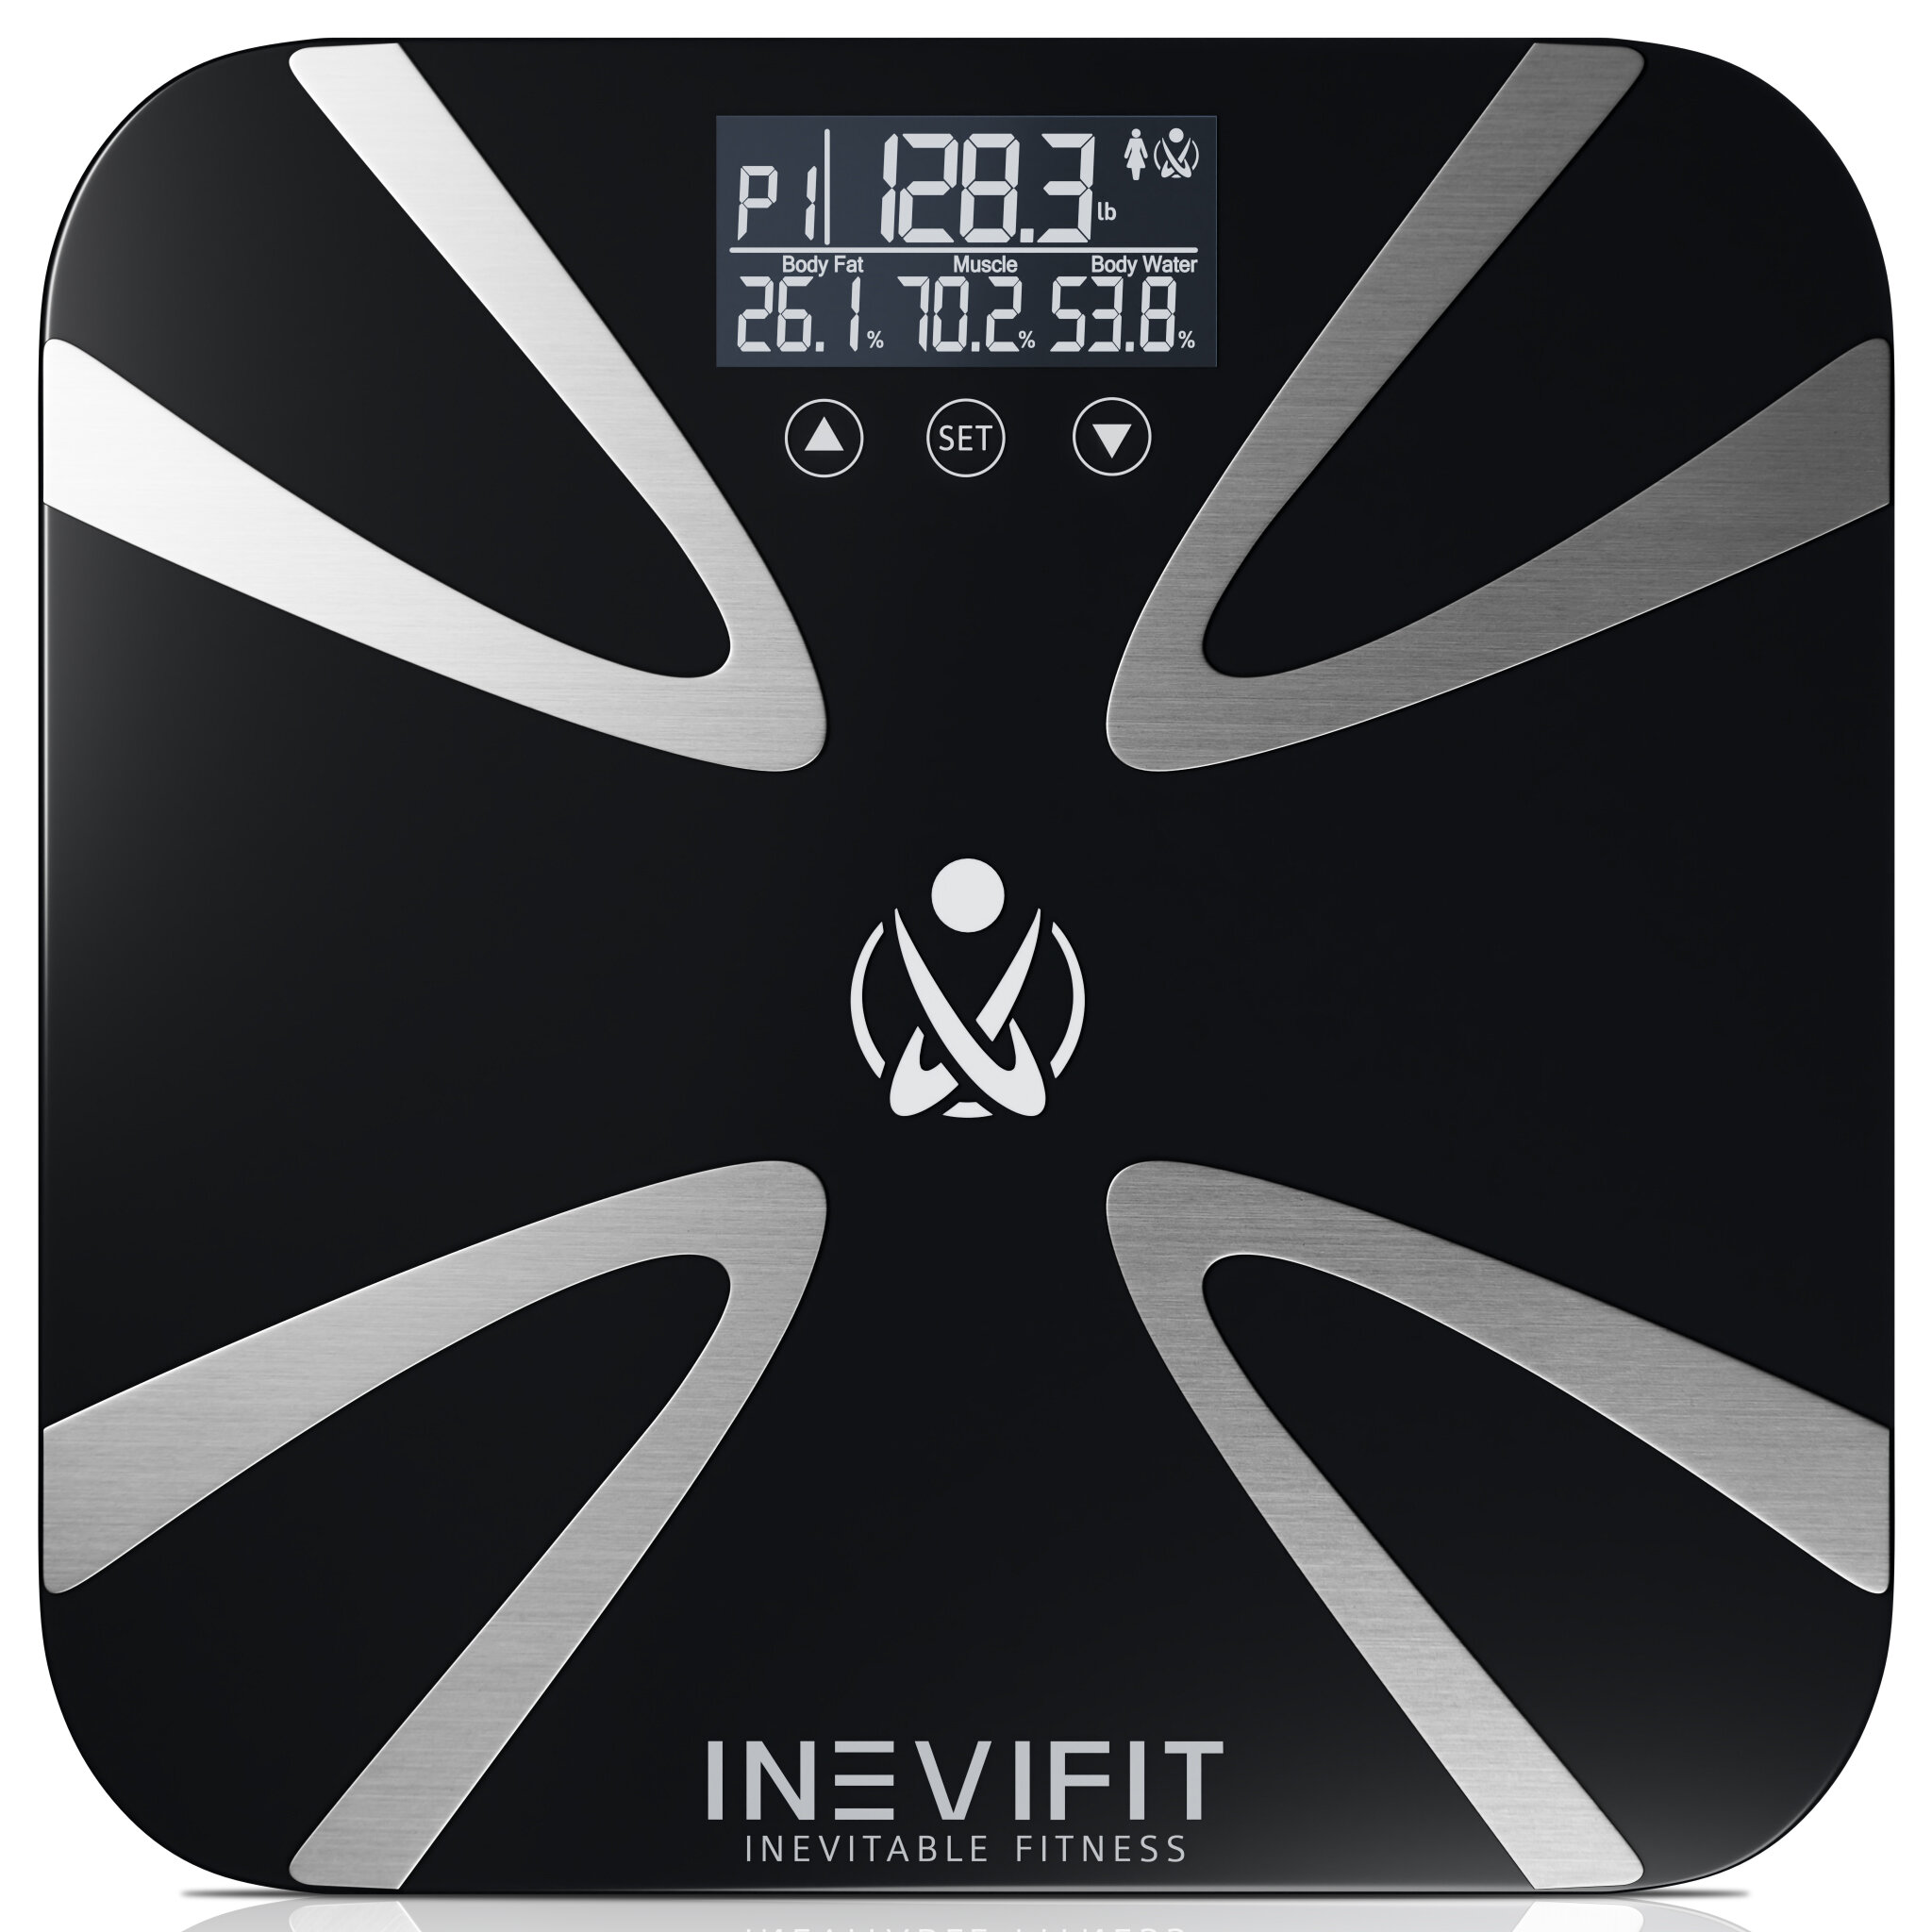 Inevifit EROS Bluetooth Body Fat Scale Smart BMI Highly Accurate Digital  Bathroom Body Bathroom Scale Review - Consumer Reports